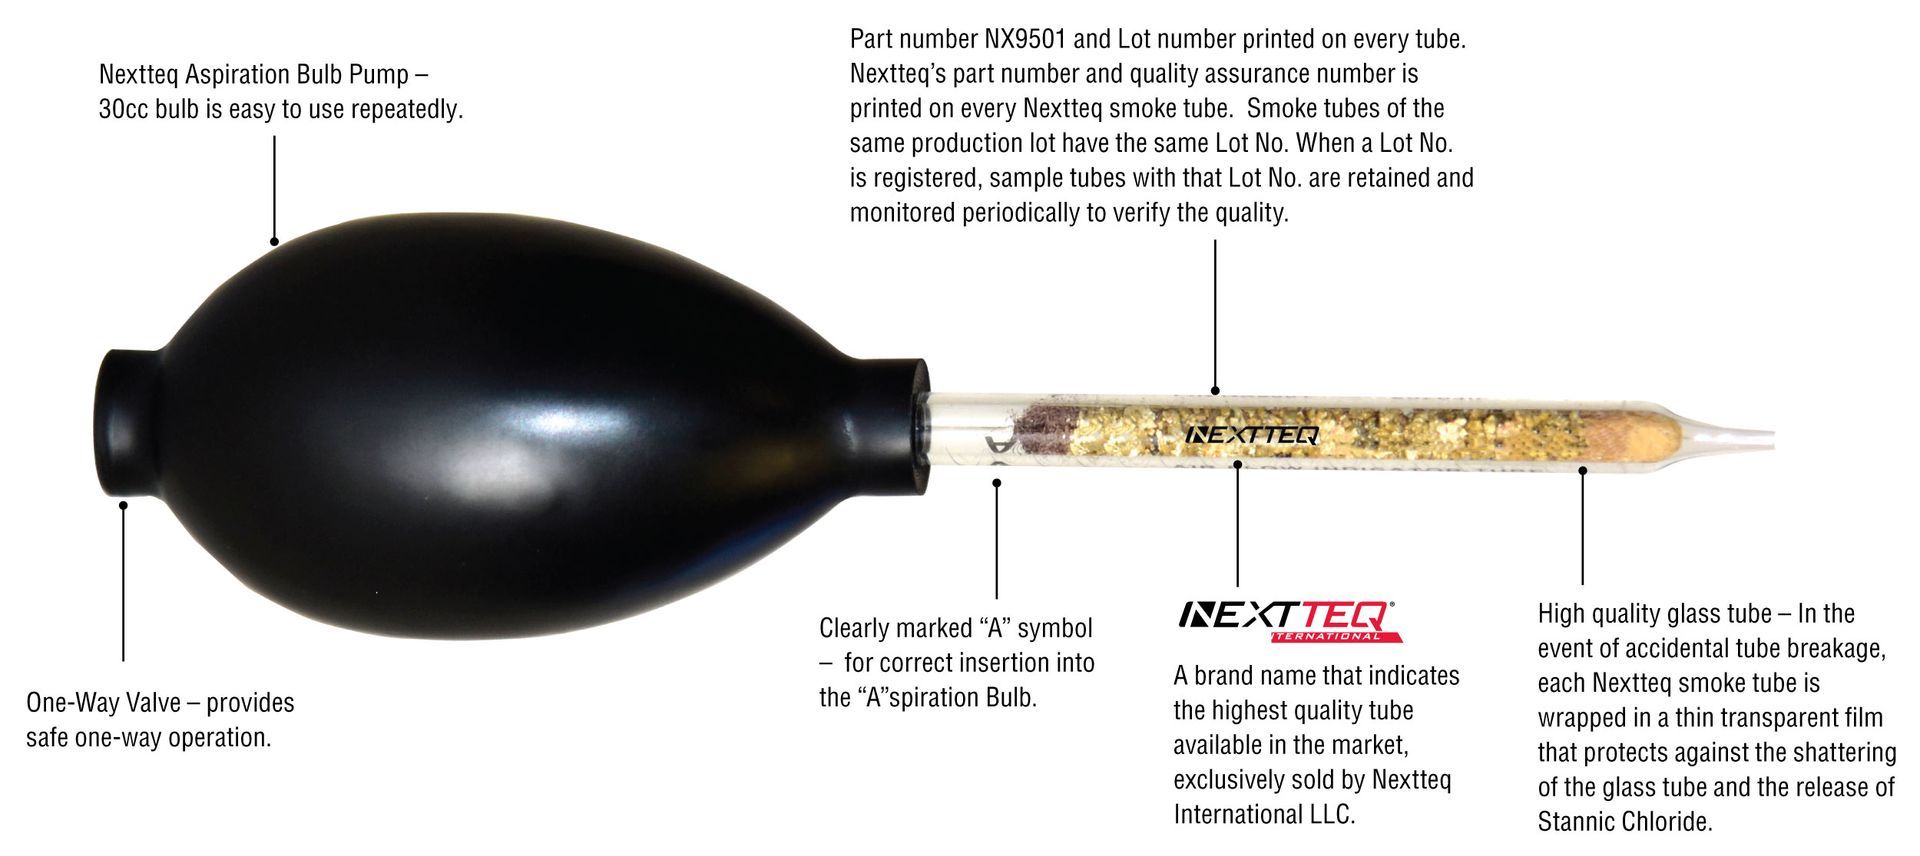 A Nextteq® Irritant Smoke Tube attached to an aspirator bulb with feature call-outs.